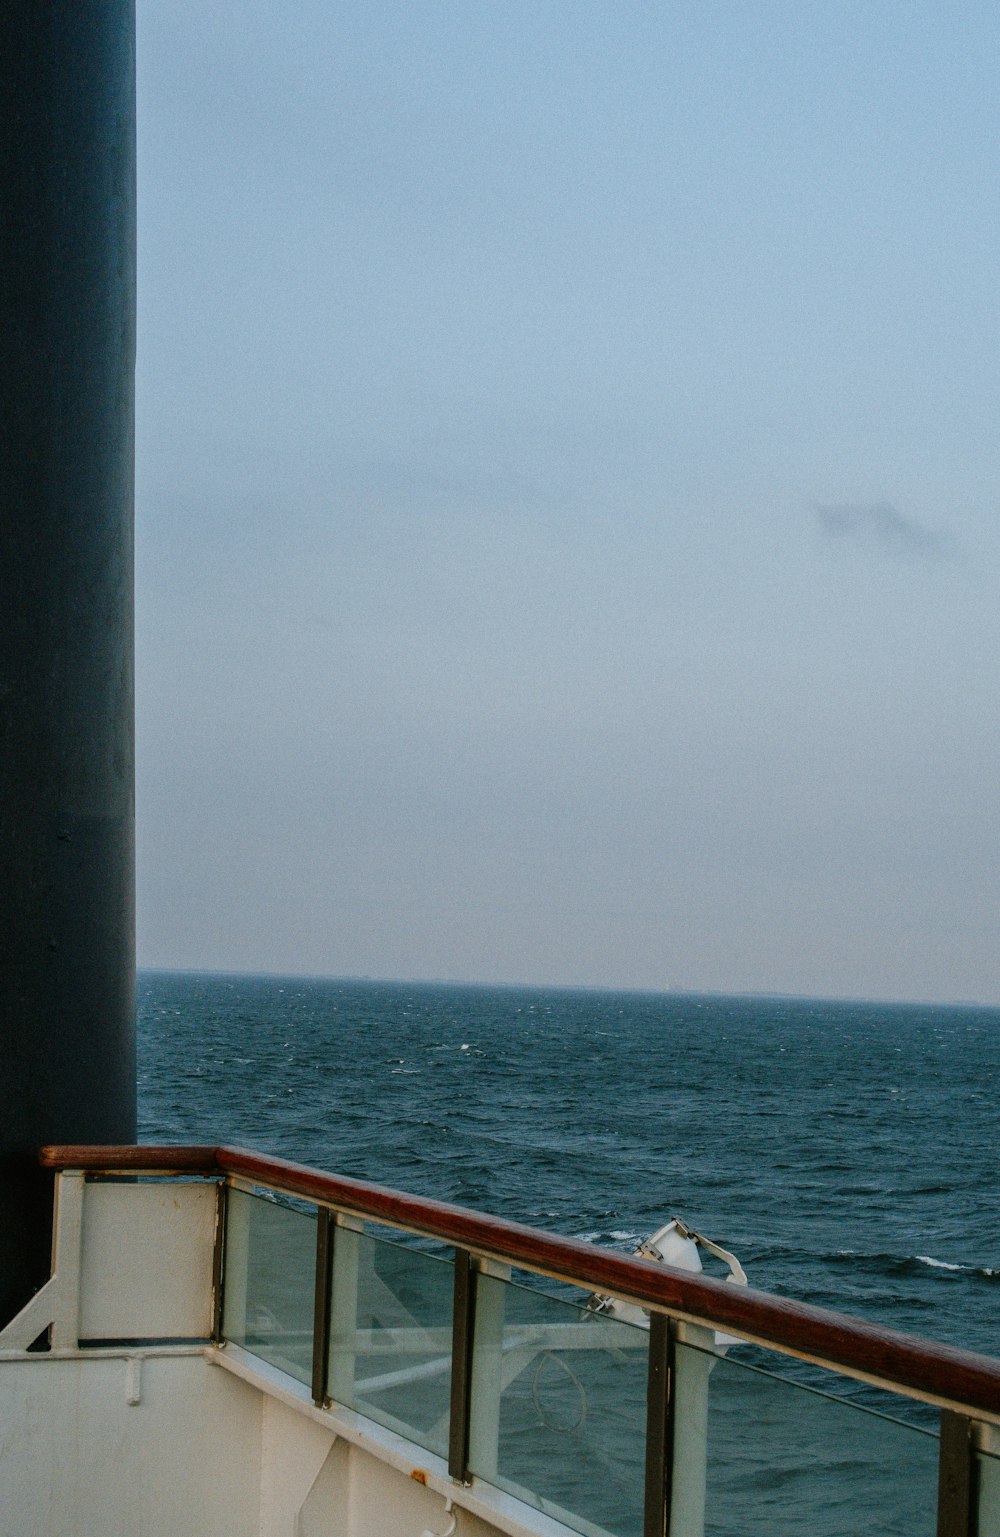 a seagull is sitting on the railing of a boat